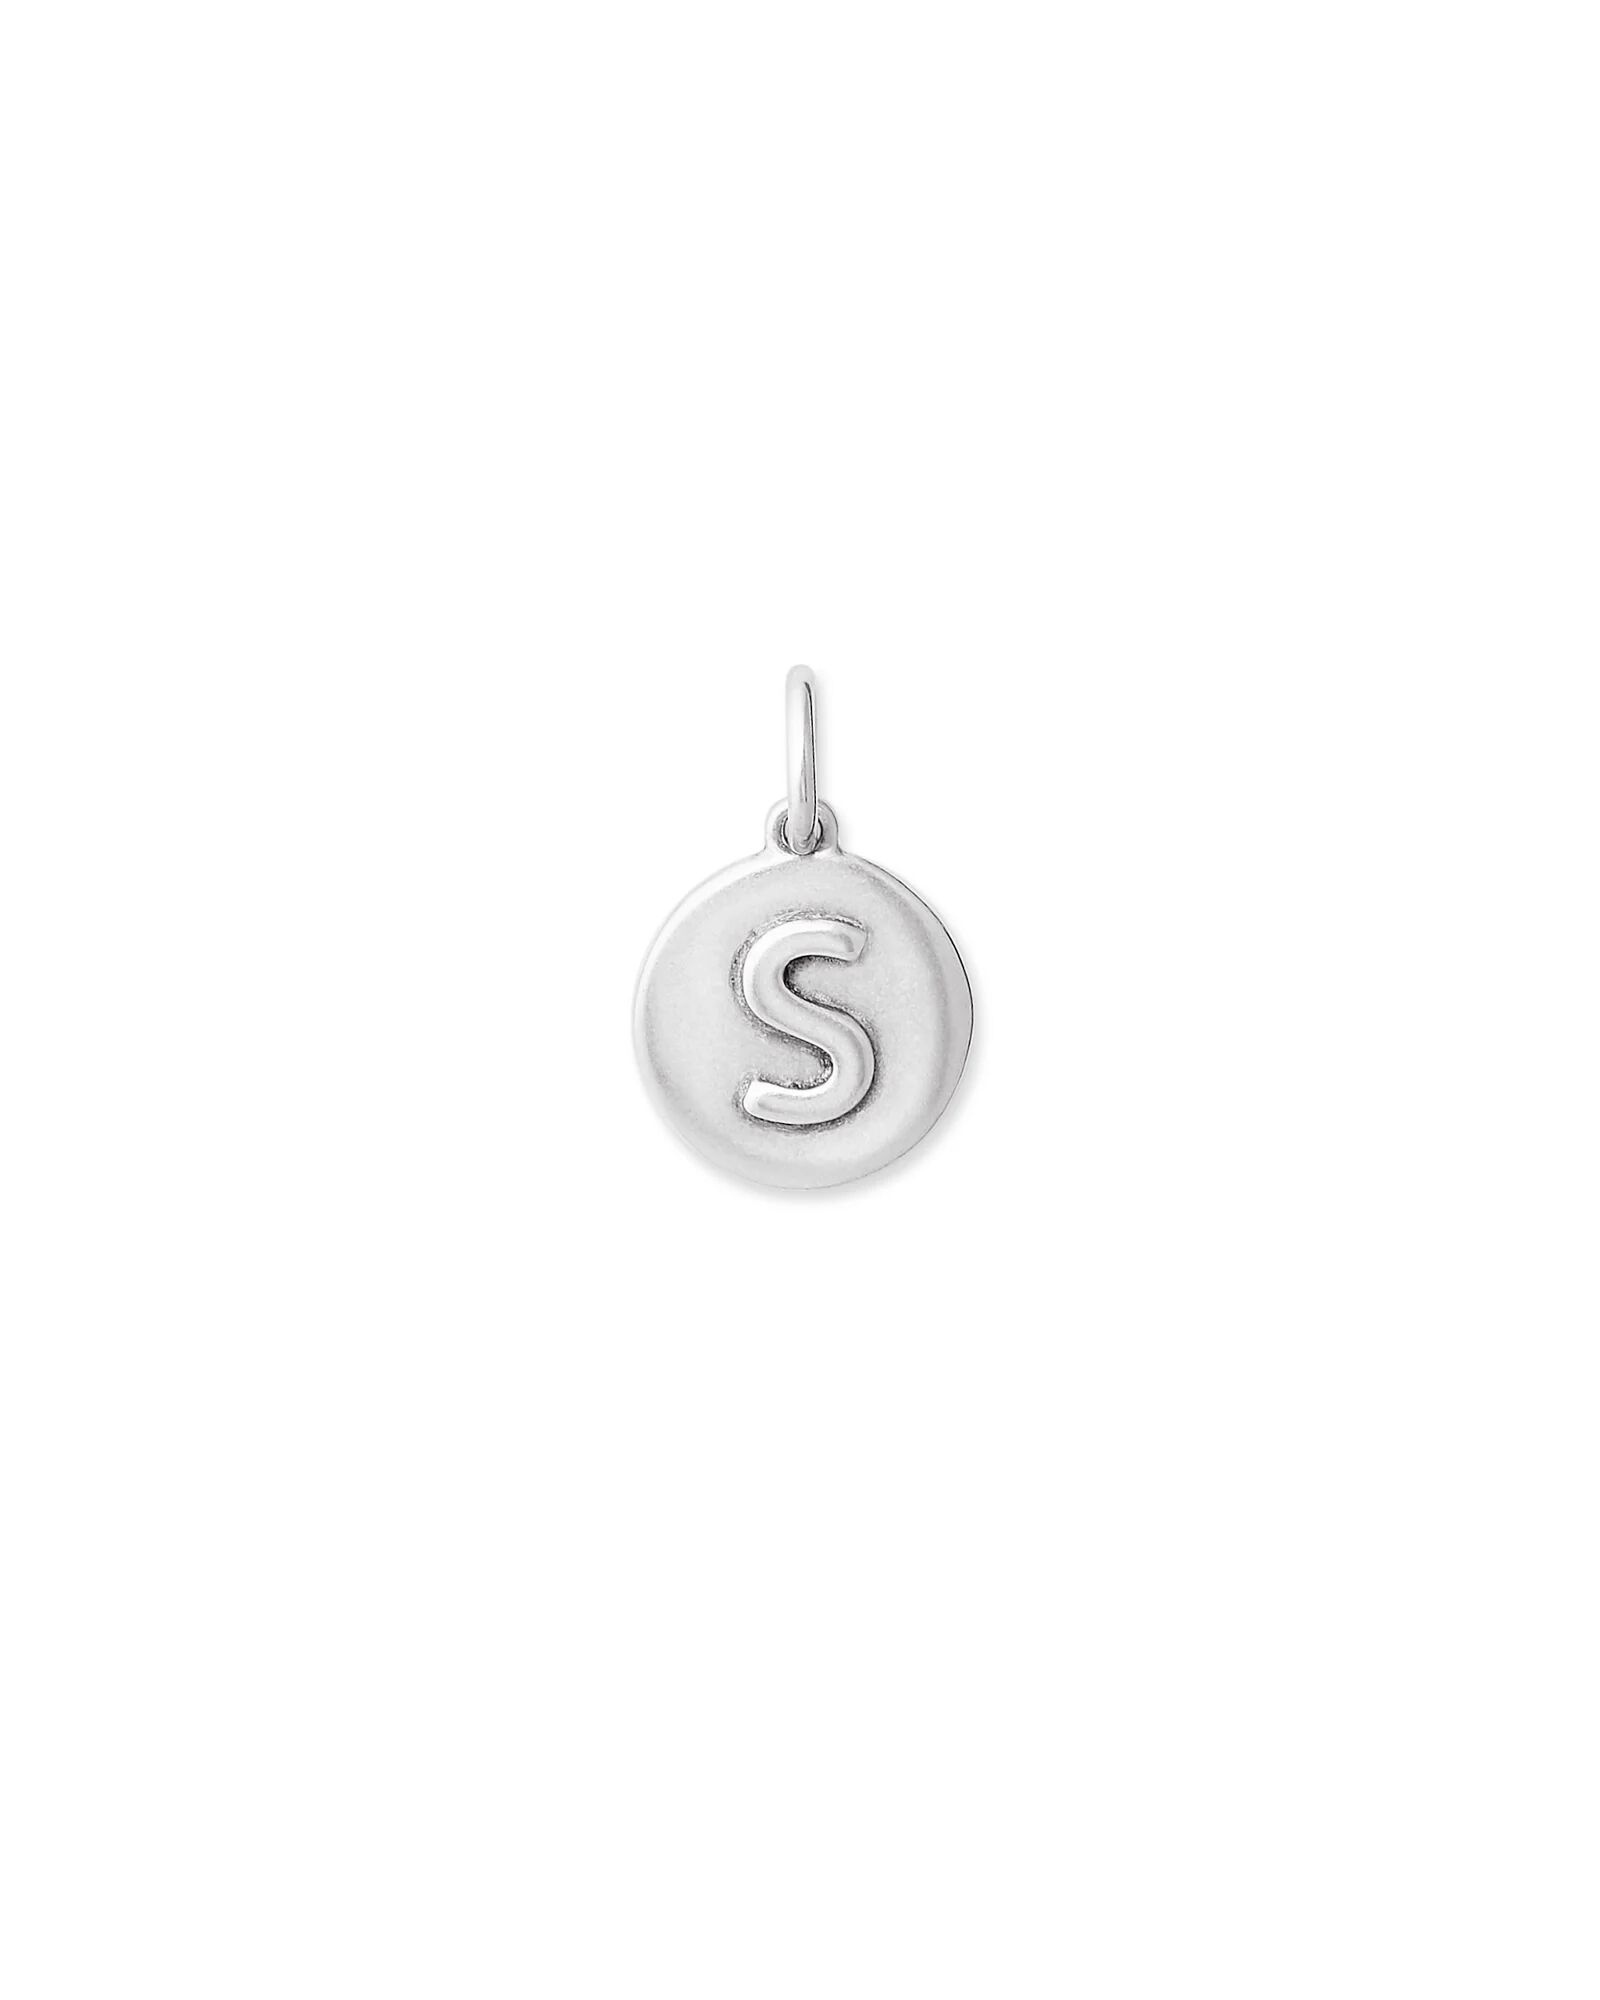 Kendra Scott Letter S Coin Charm in Oxidized Sterling Silver   Metal